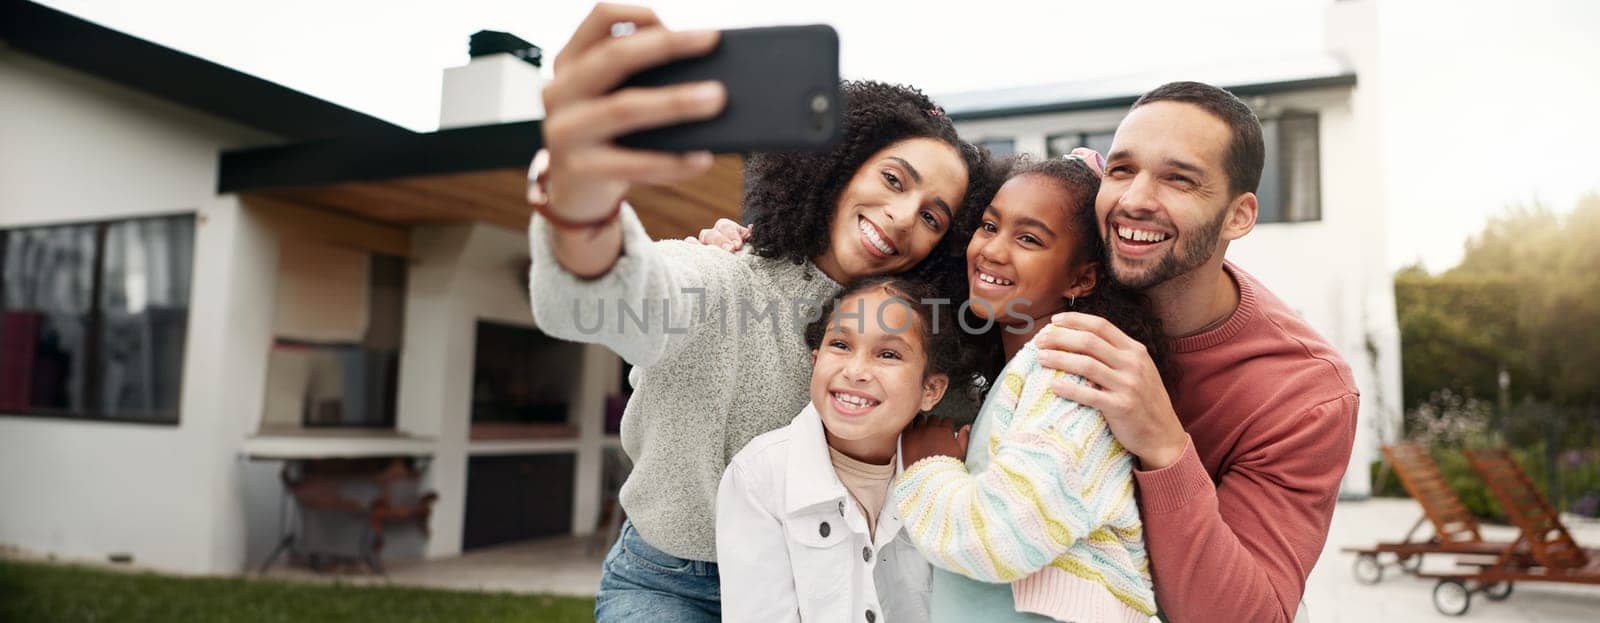 Children, family and selfie outdoor with a smile, love and care in home backyard. Young latino woman and man or parents hug happy girl kids for a profile picture or social media post on holiday.